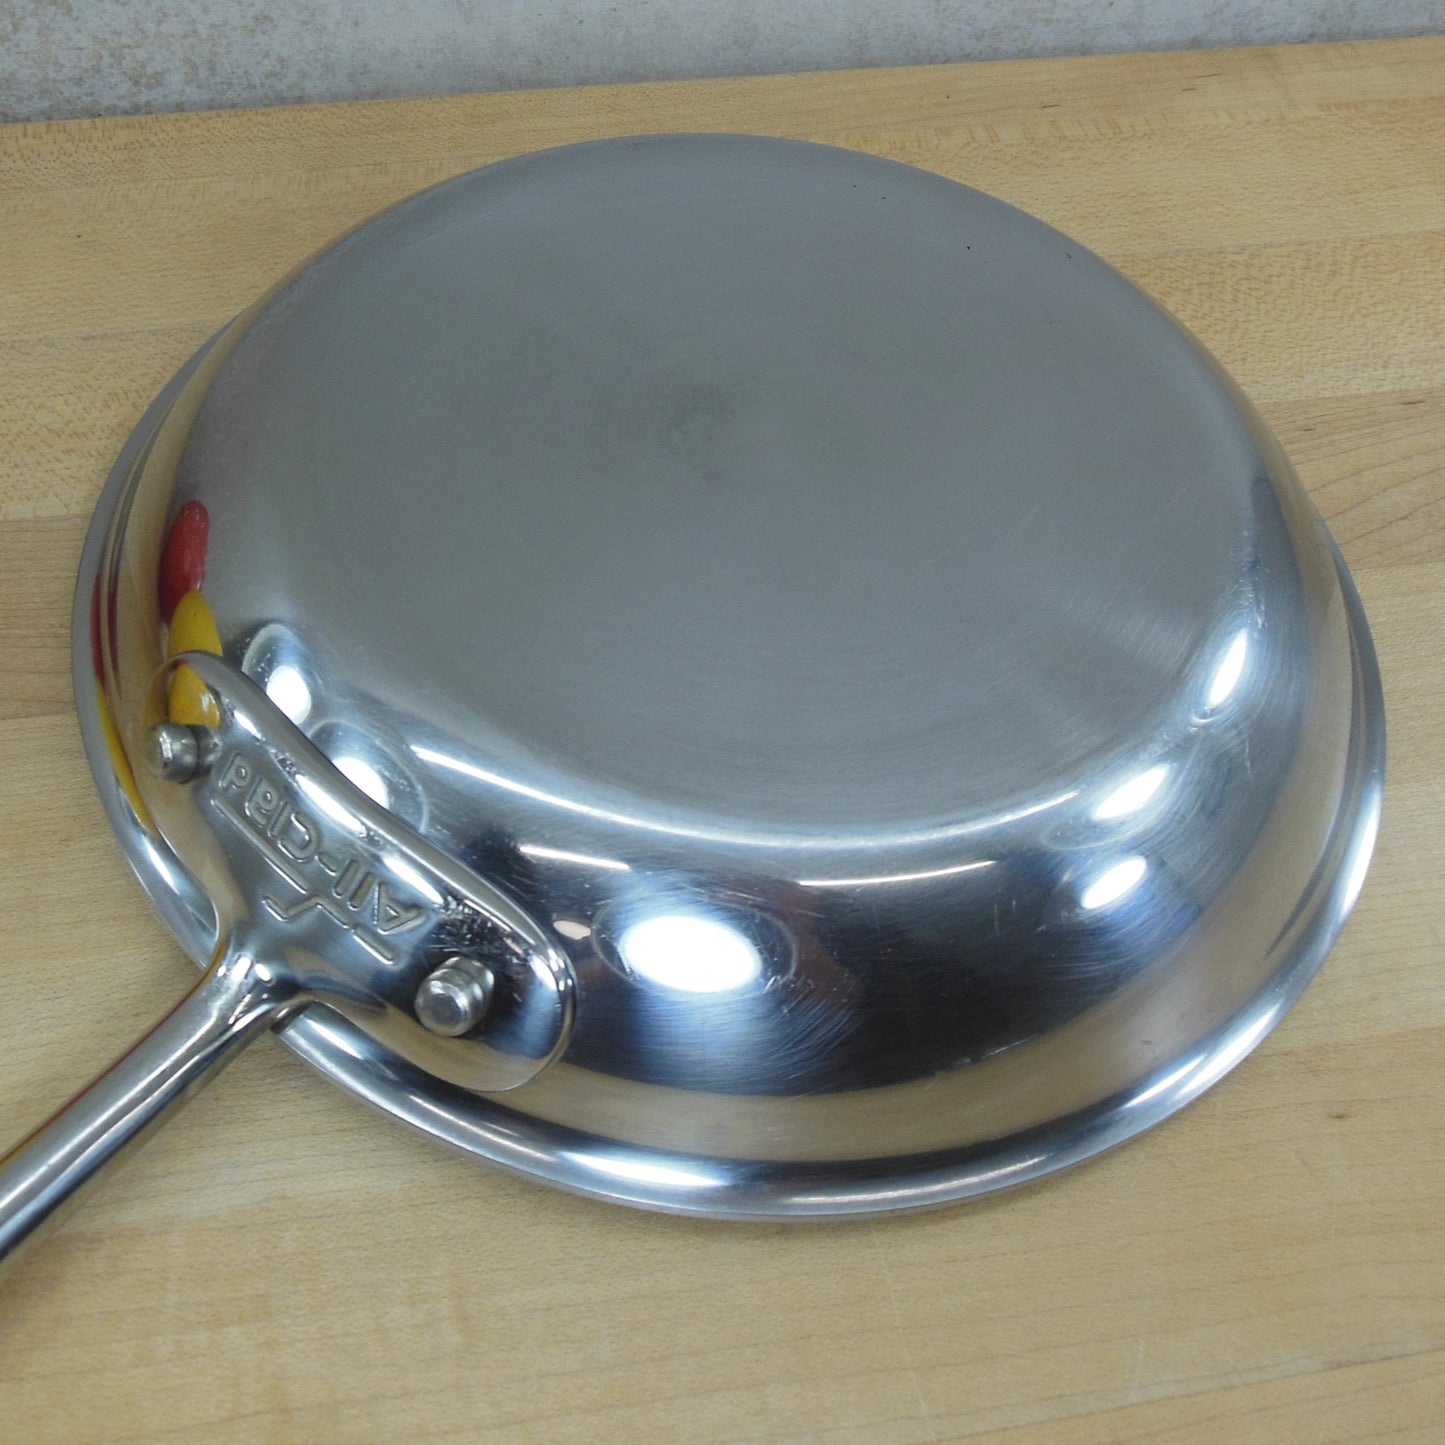 All-Clad Ltd Stainless Anodized 8.5 Fry Pan Skillet – Olde